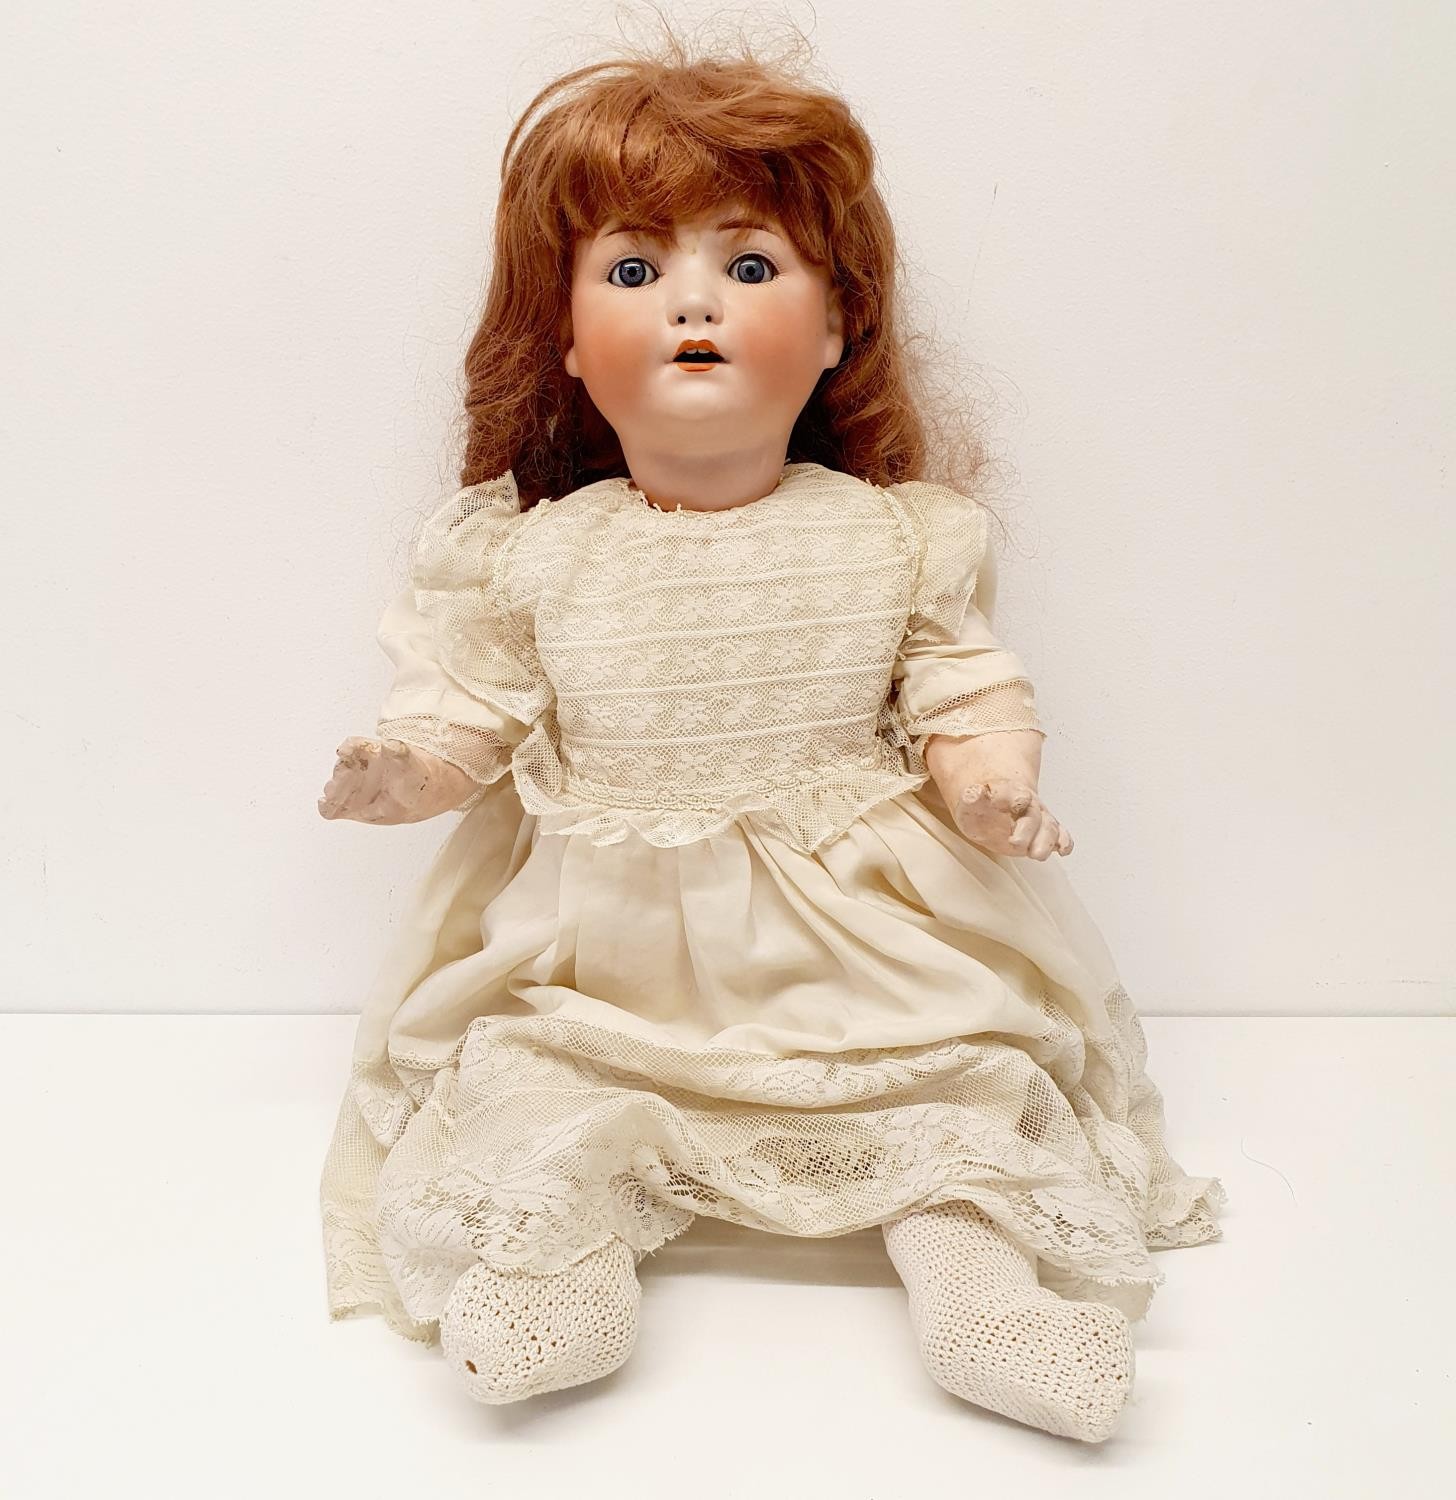 A Heubach German bisque headed doll, with a composite body, and millefiori glass eyes, 56 cm